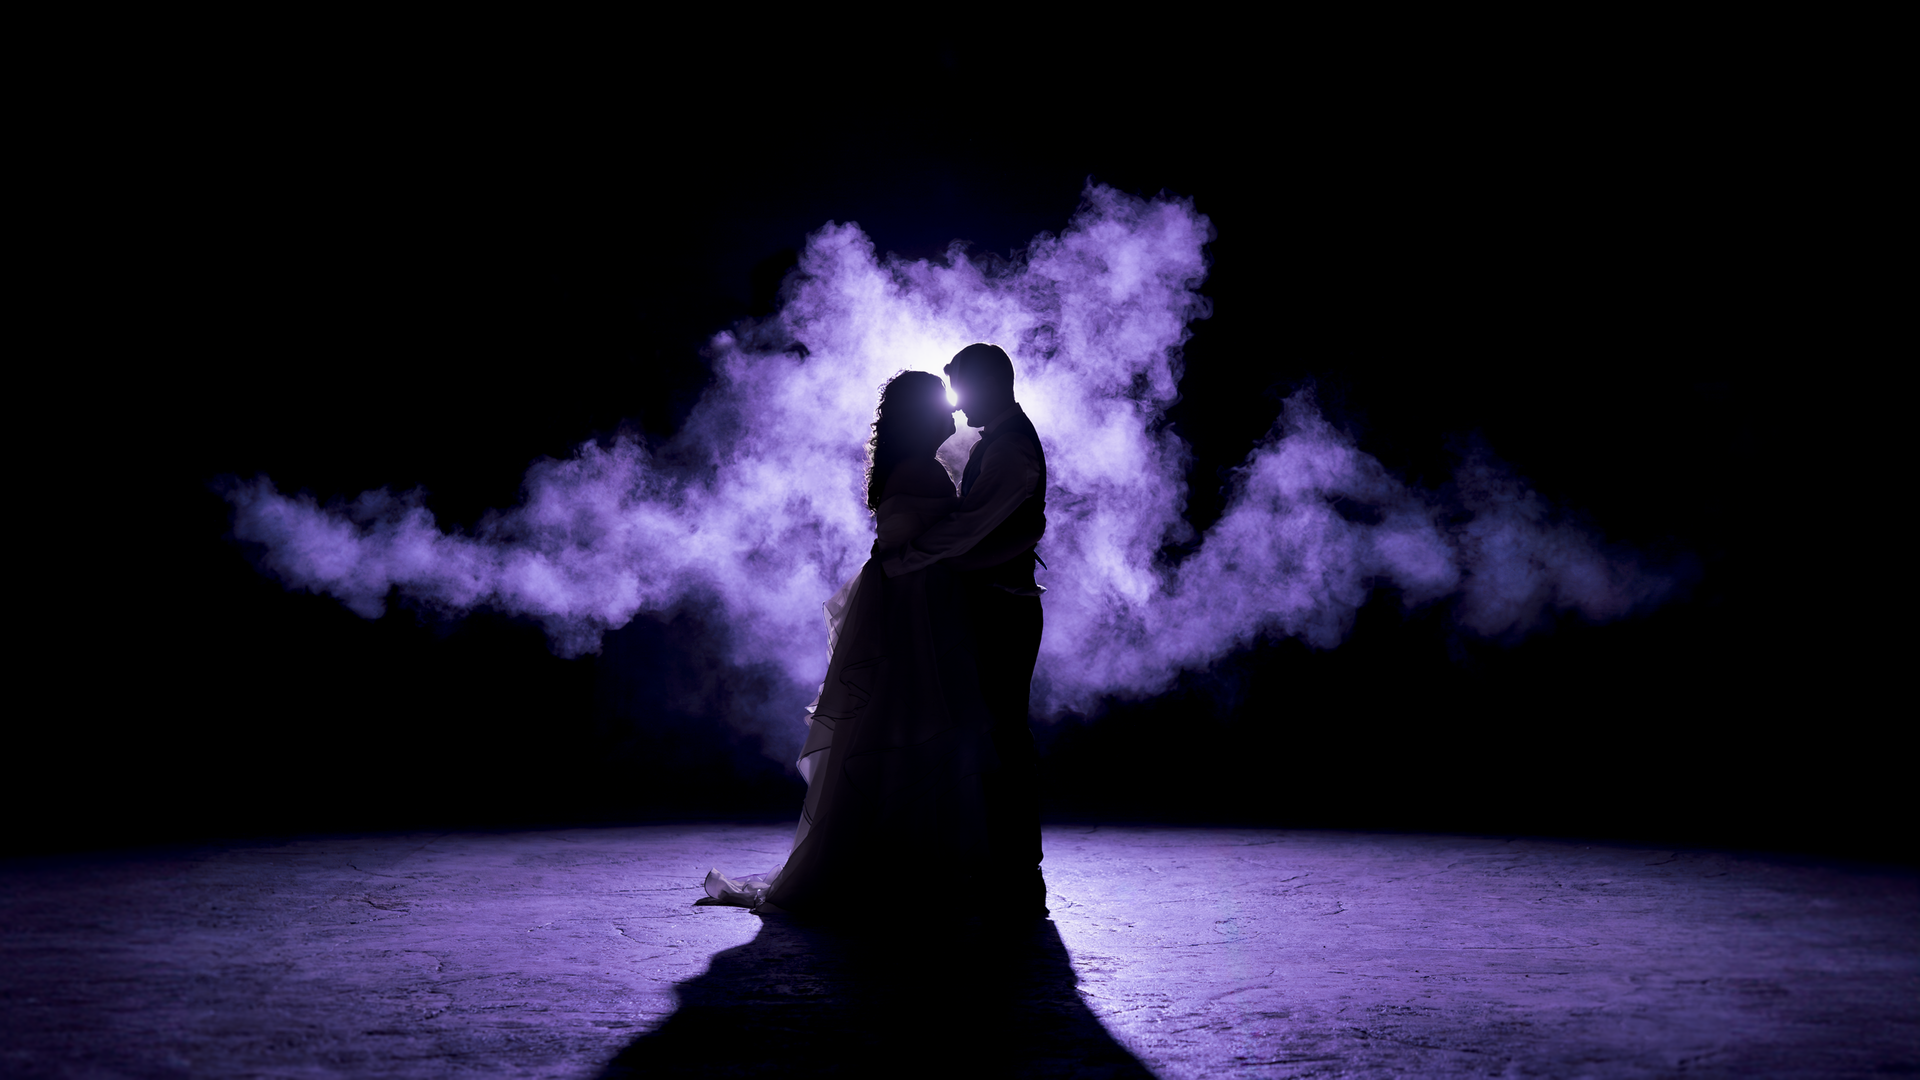 Chatham-Kent wedding photographer captures a romantic silhouette kiss with unique backlighting and haze.